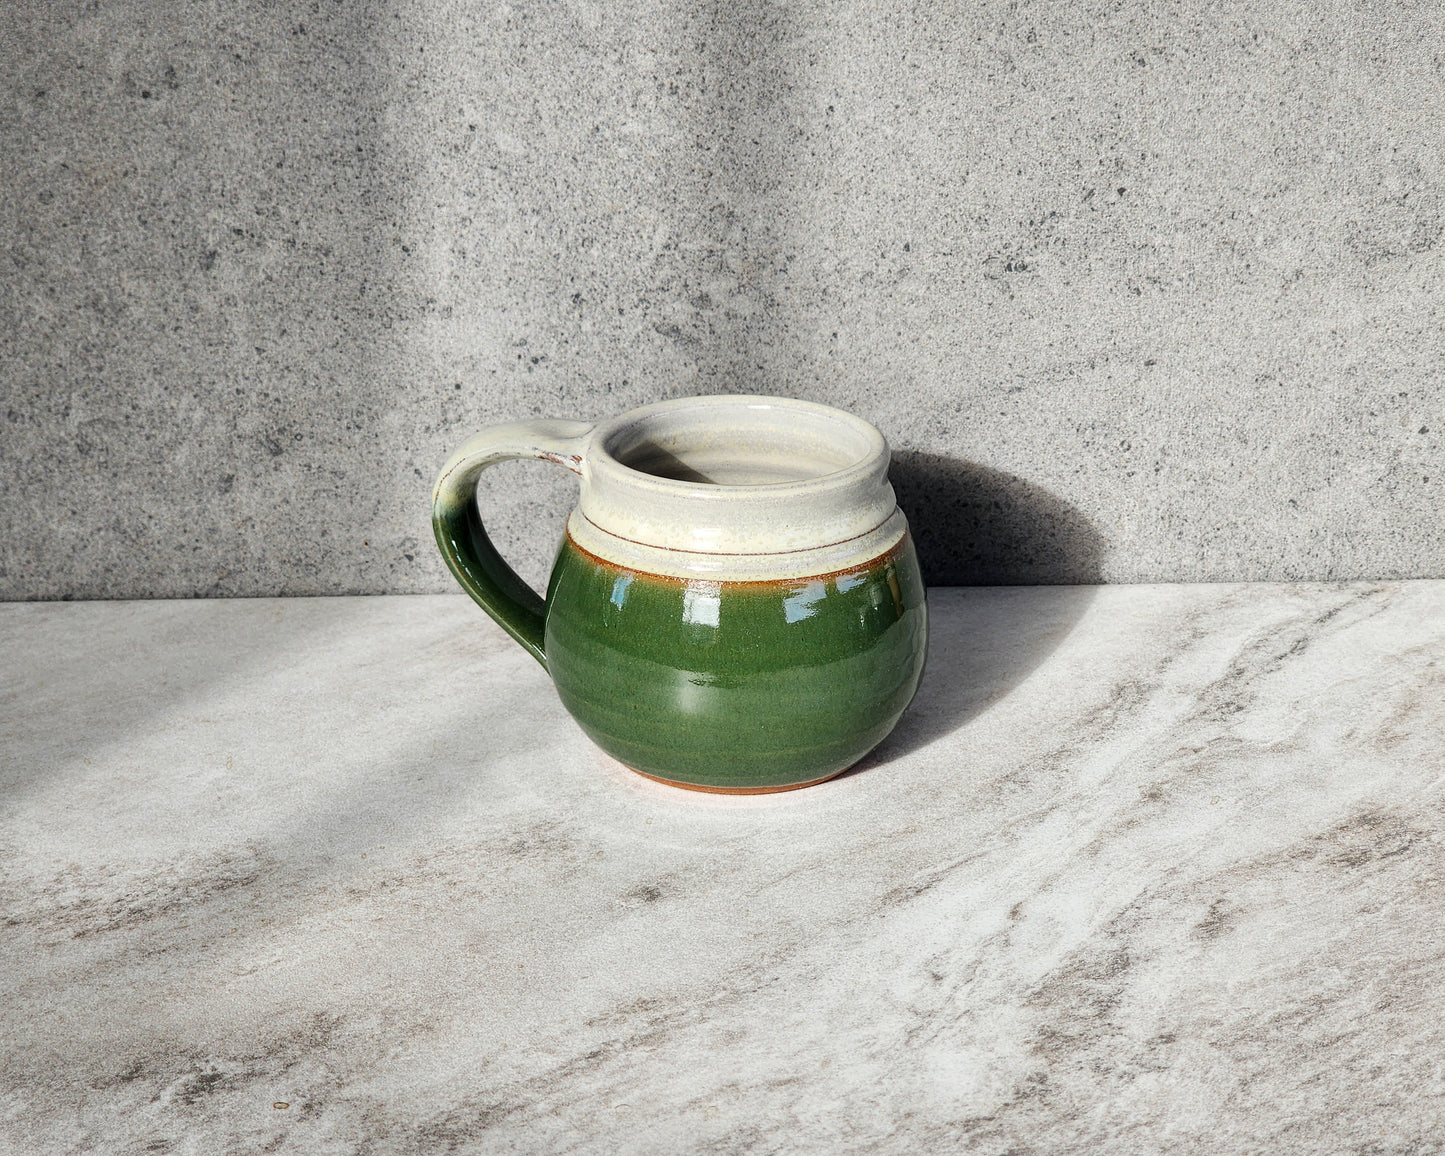 Indulge in the rustic charm of the Dark Green small mug by Clinton Pottery. With its deep, earthy tone reminiscent of lush forests, this mug brings a sense of tranquility to your coffee or tea time. Crafted with care and designed for comfort, it's the perfect vessel for enjoying your favorite hot beverage. 